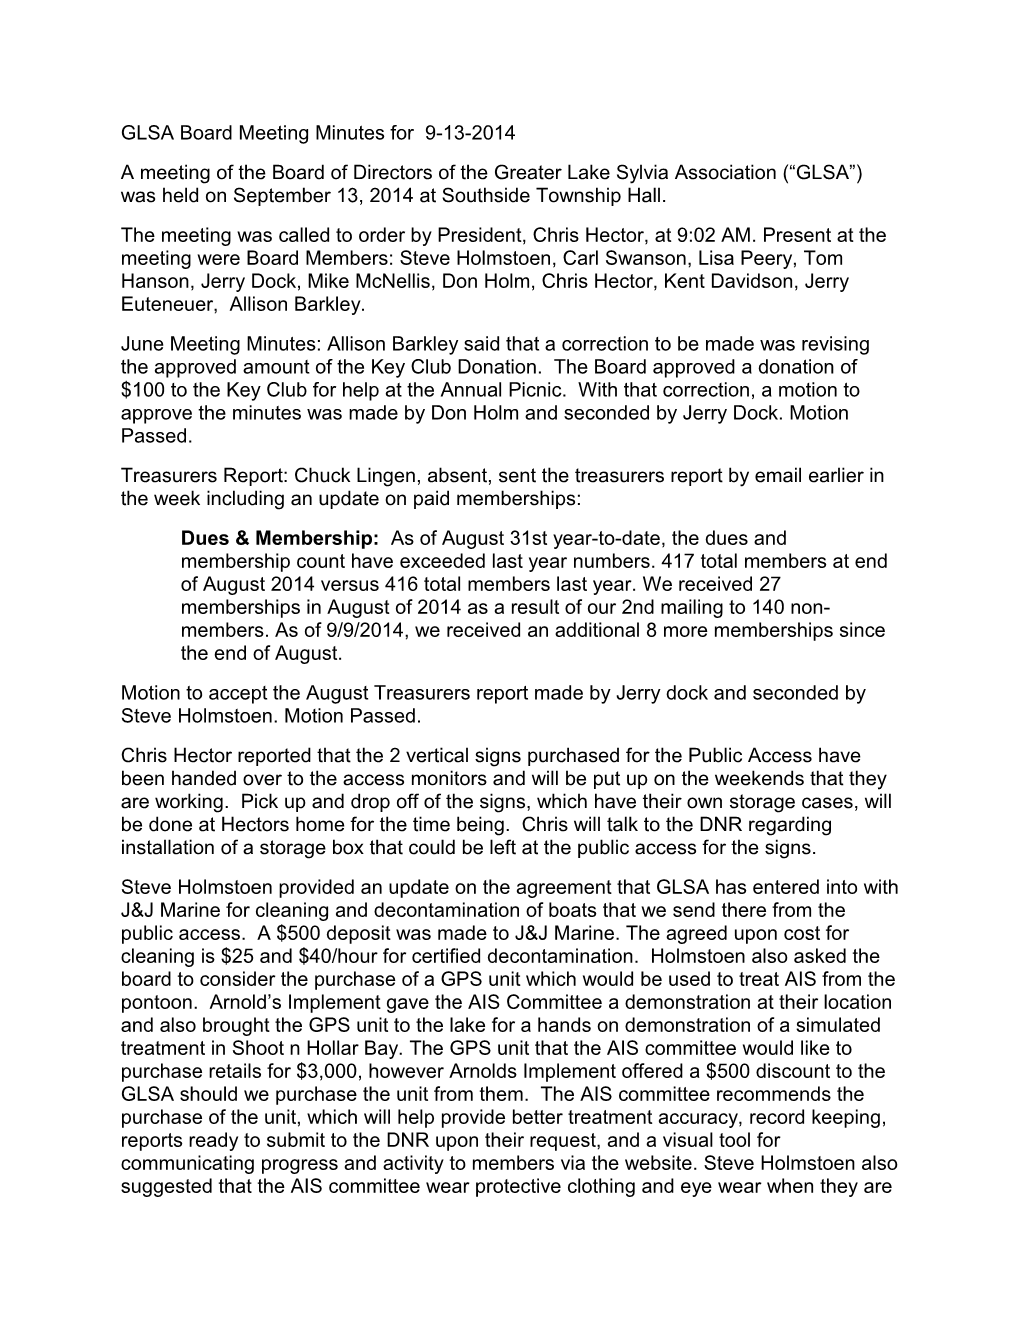 GLSA Board Meeting Minutes for 9-13-2014